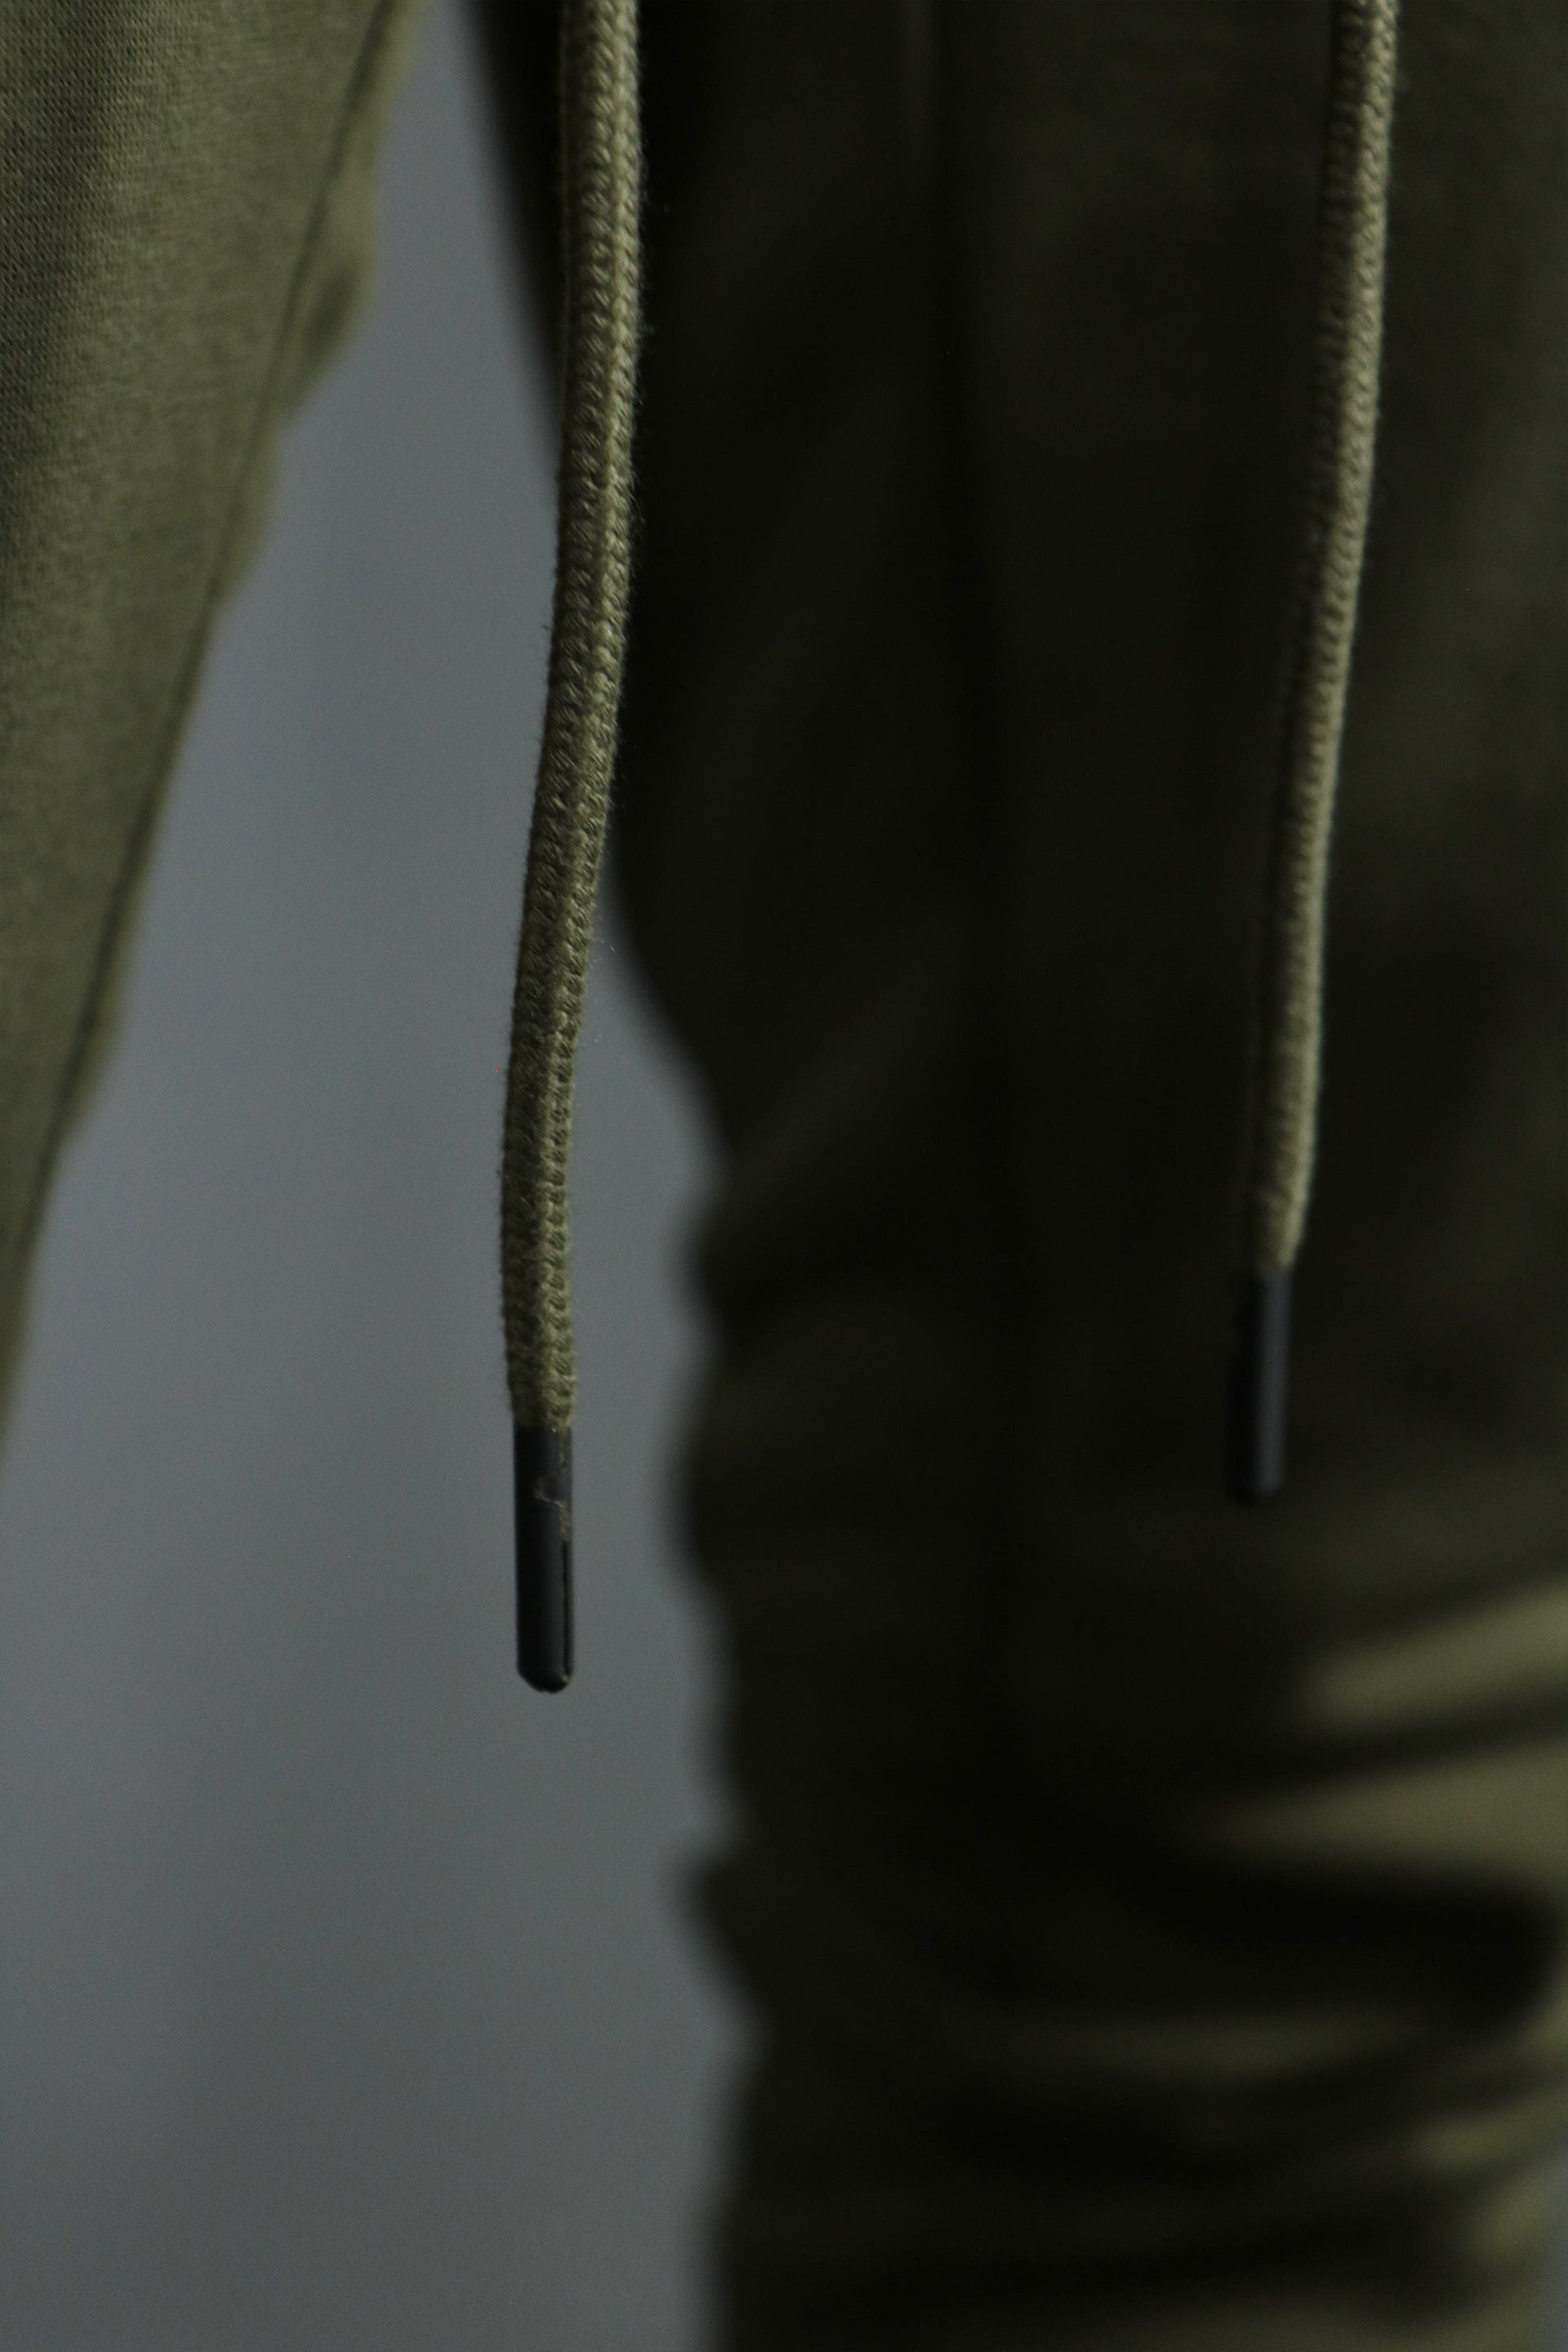 The military green sweatpants by Jordan Craig are supported by drawstrings to make the joggers tight.